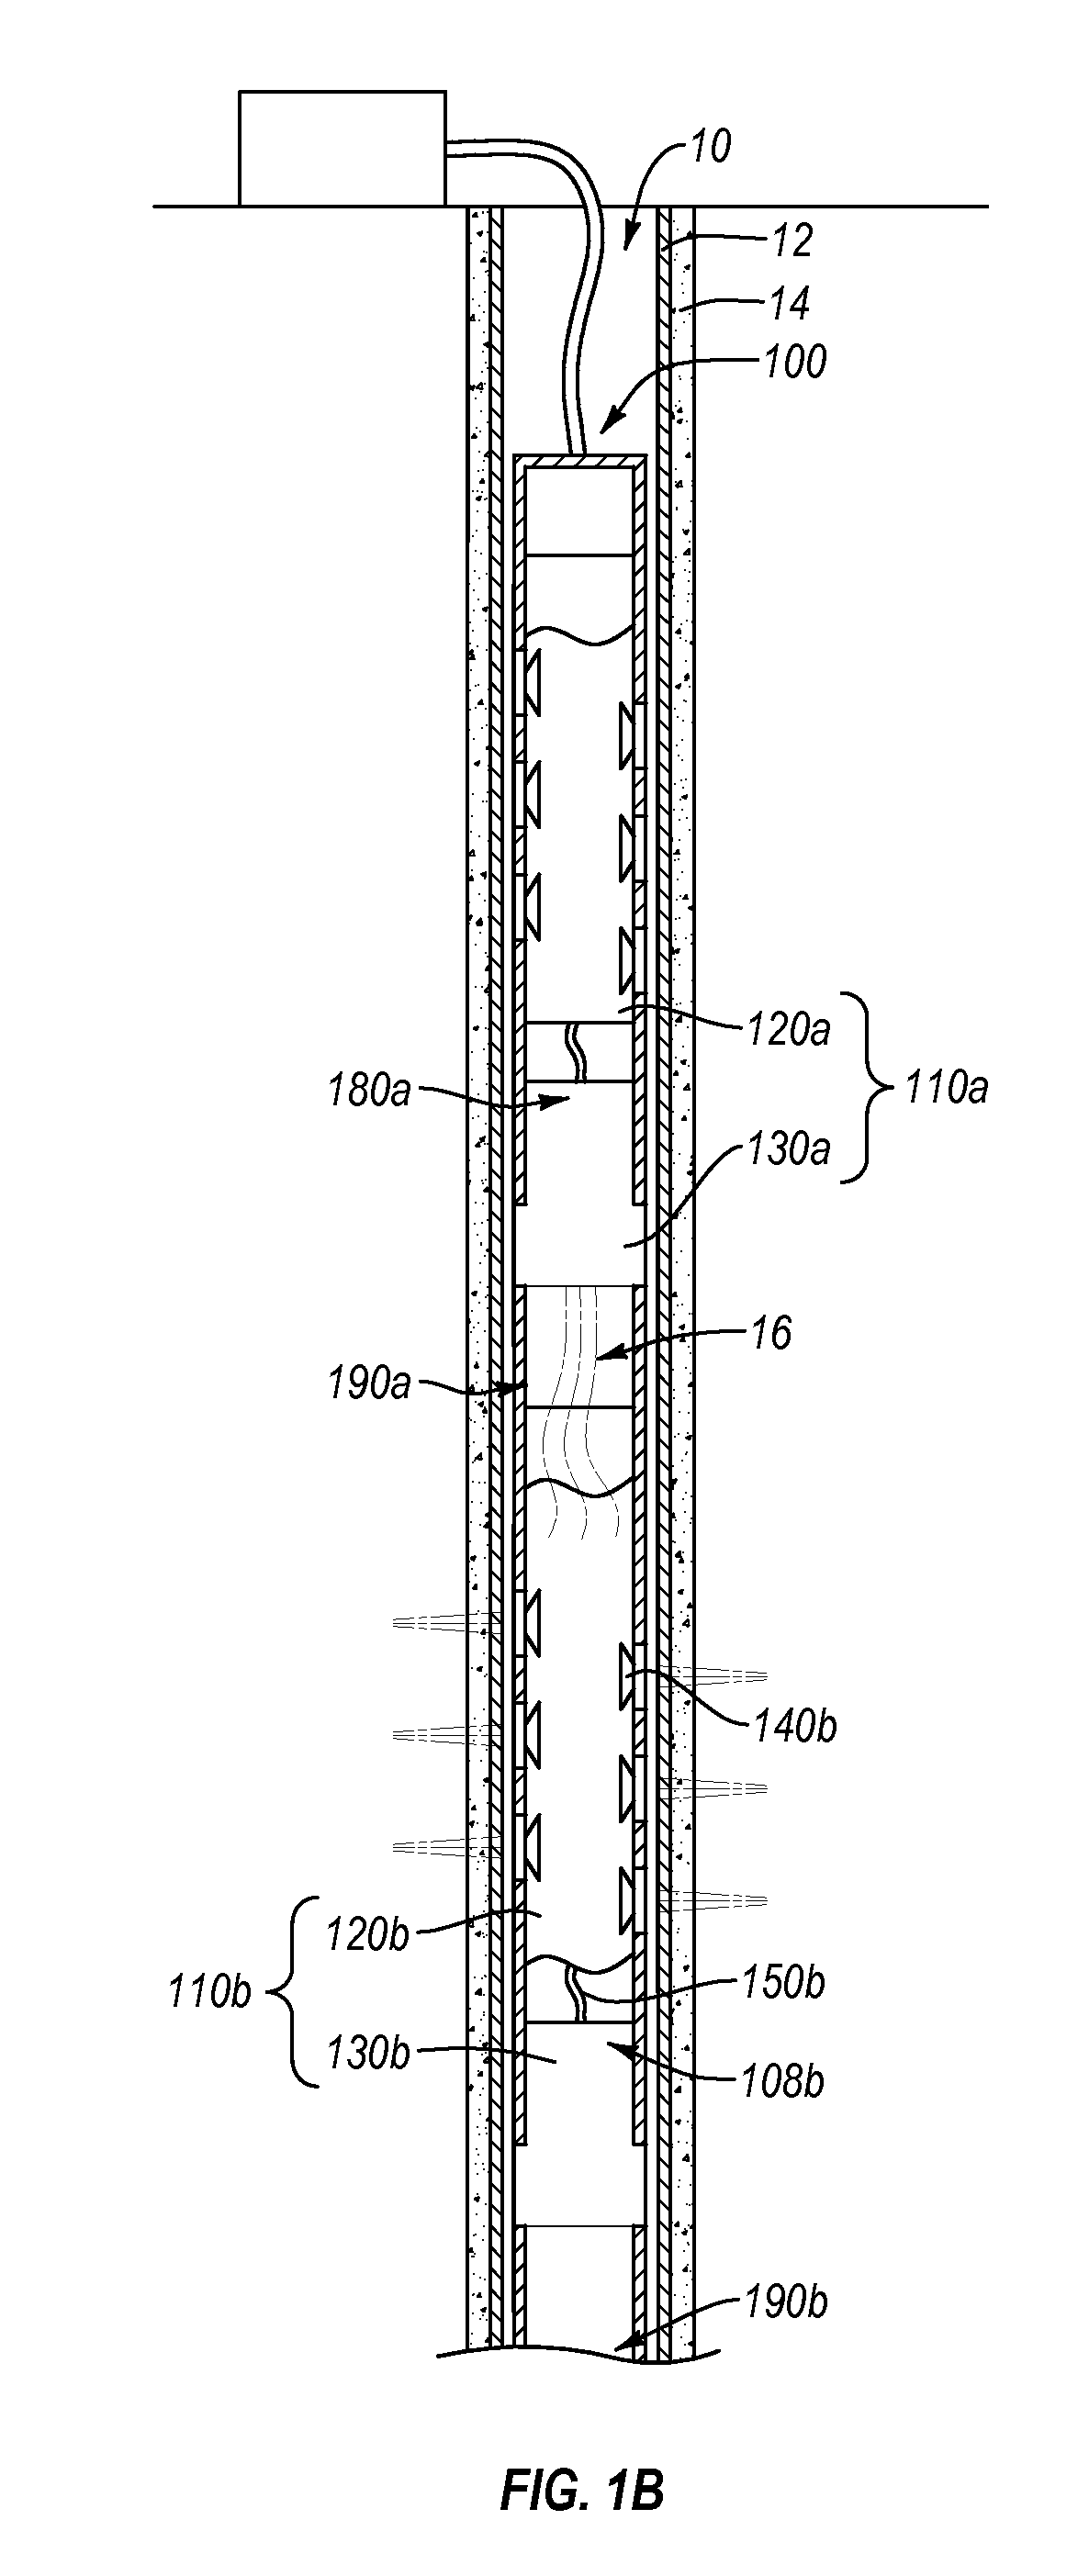 Pass-through Bulkhead Connection Switch for a Perforating Gun